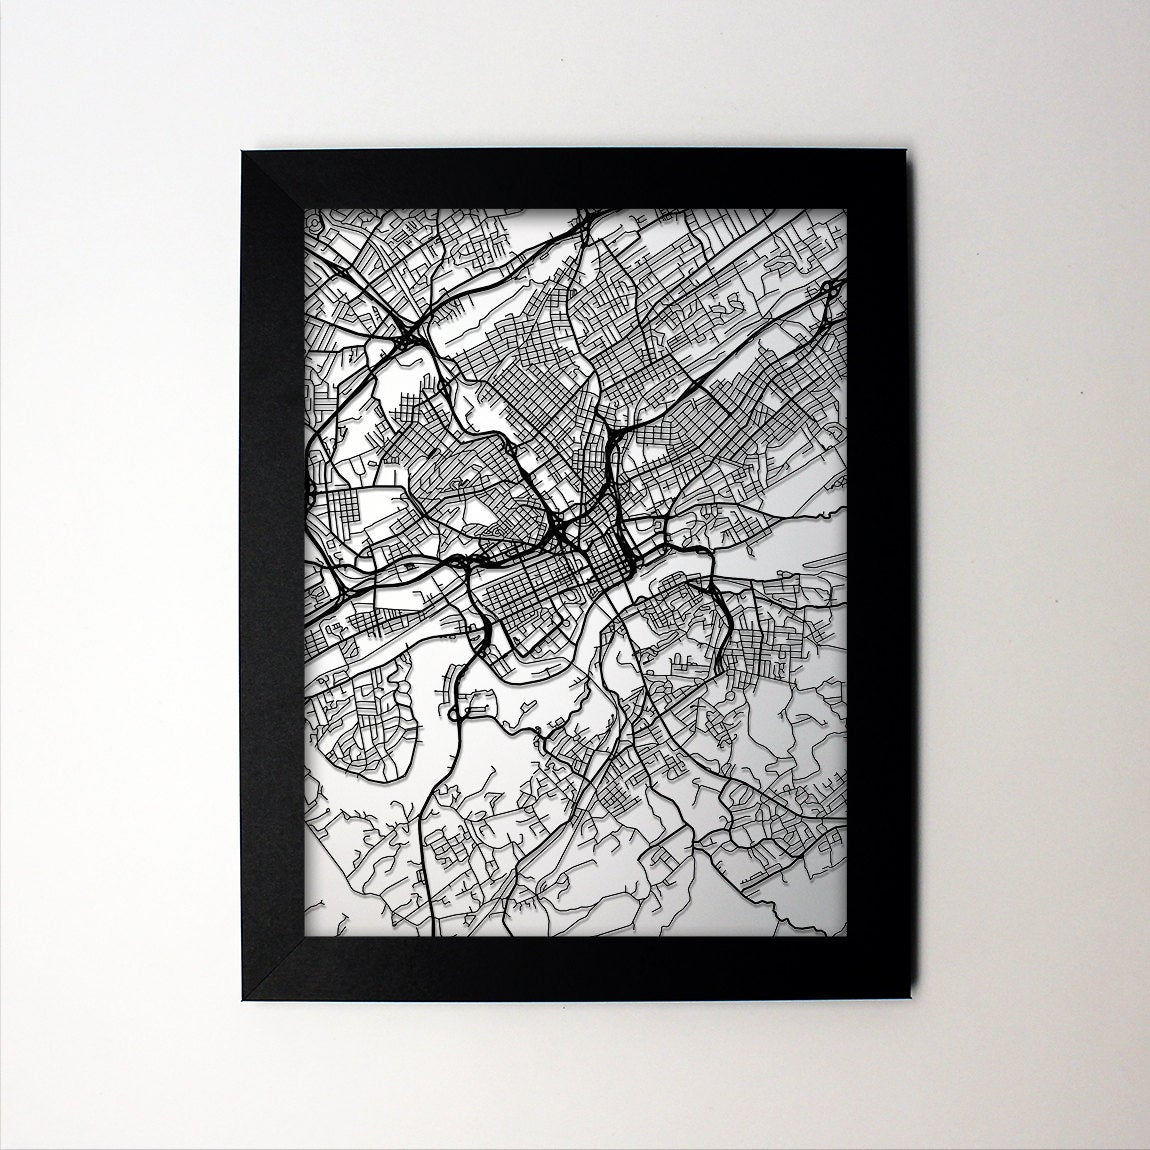 Knoxville Tennessee framed laser cut map - CarbonLight